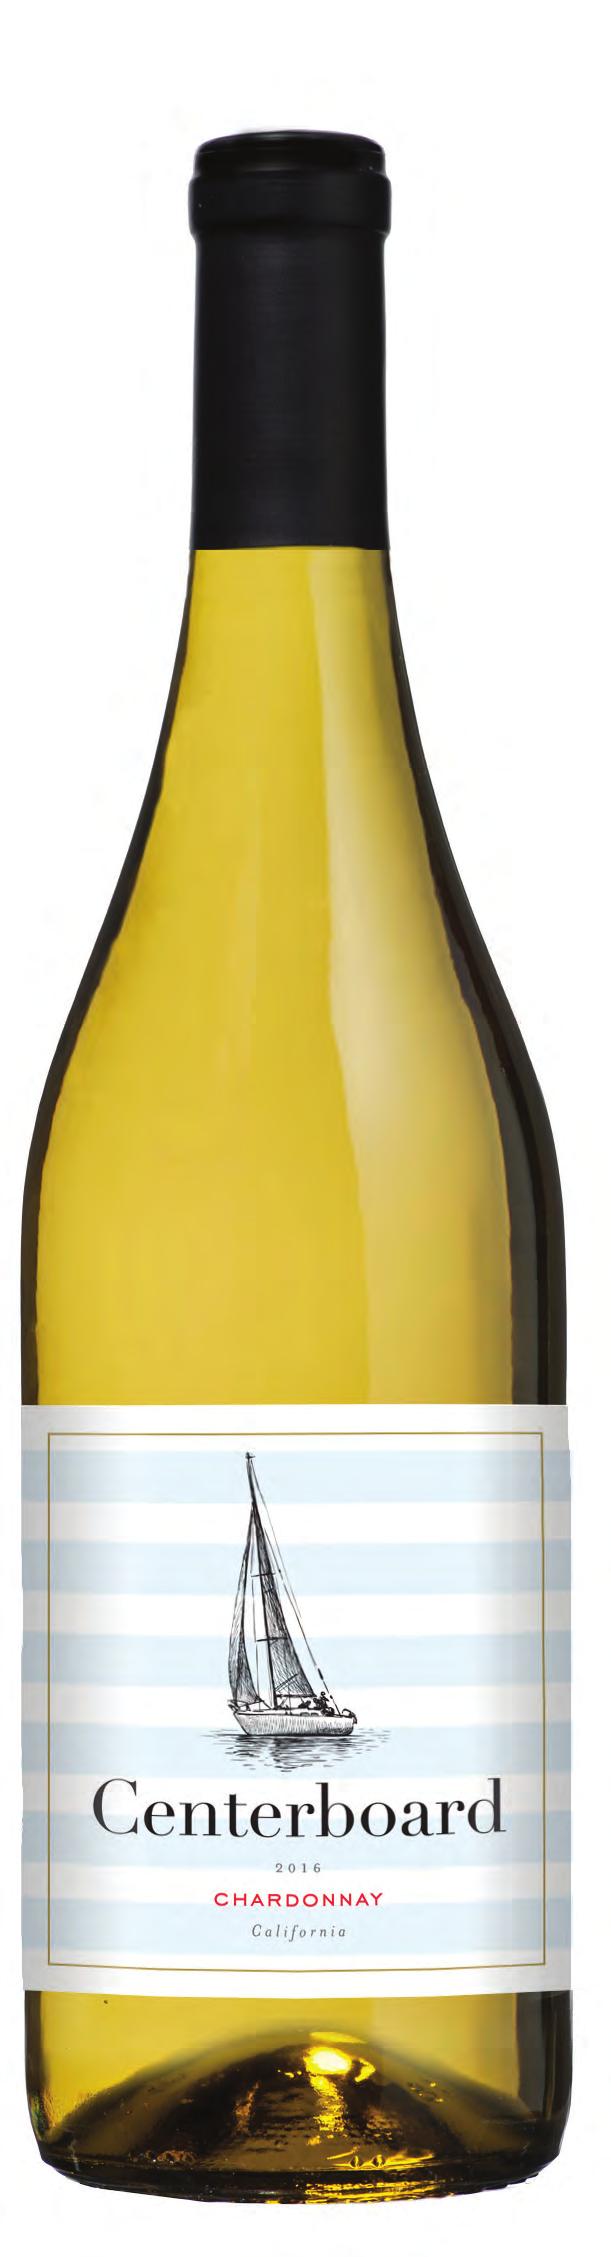 Centerboard 2016 chardonnay A centerboard keeps a sailboat moving forward in the right direction.